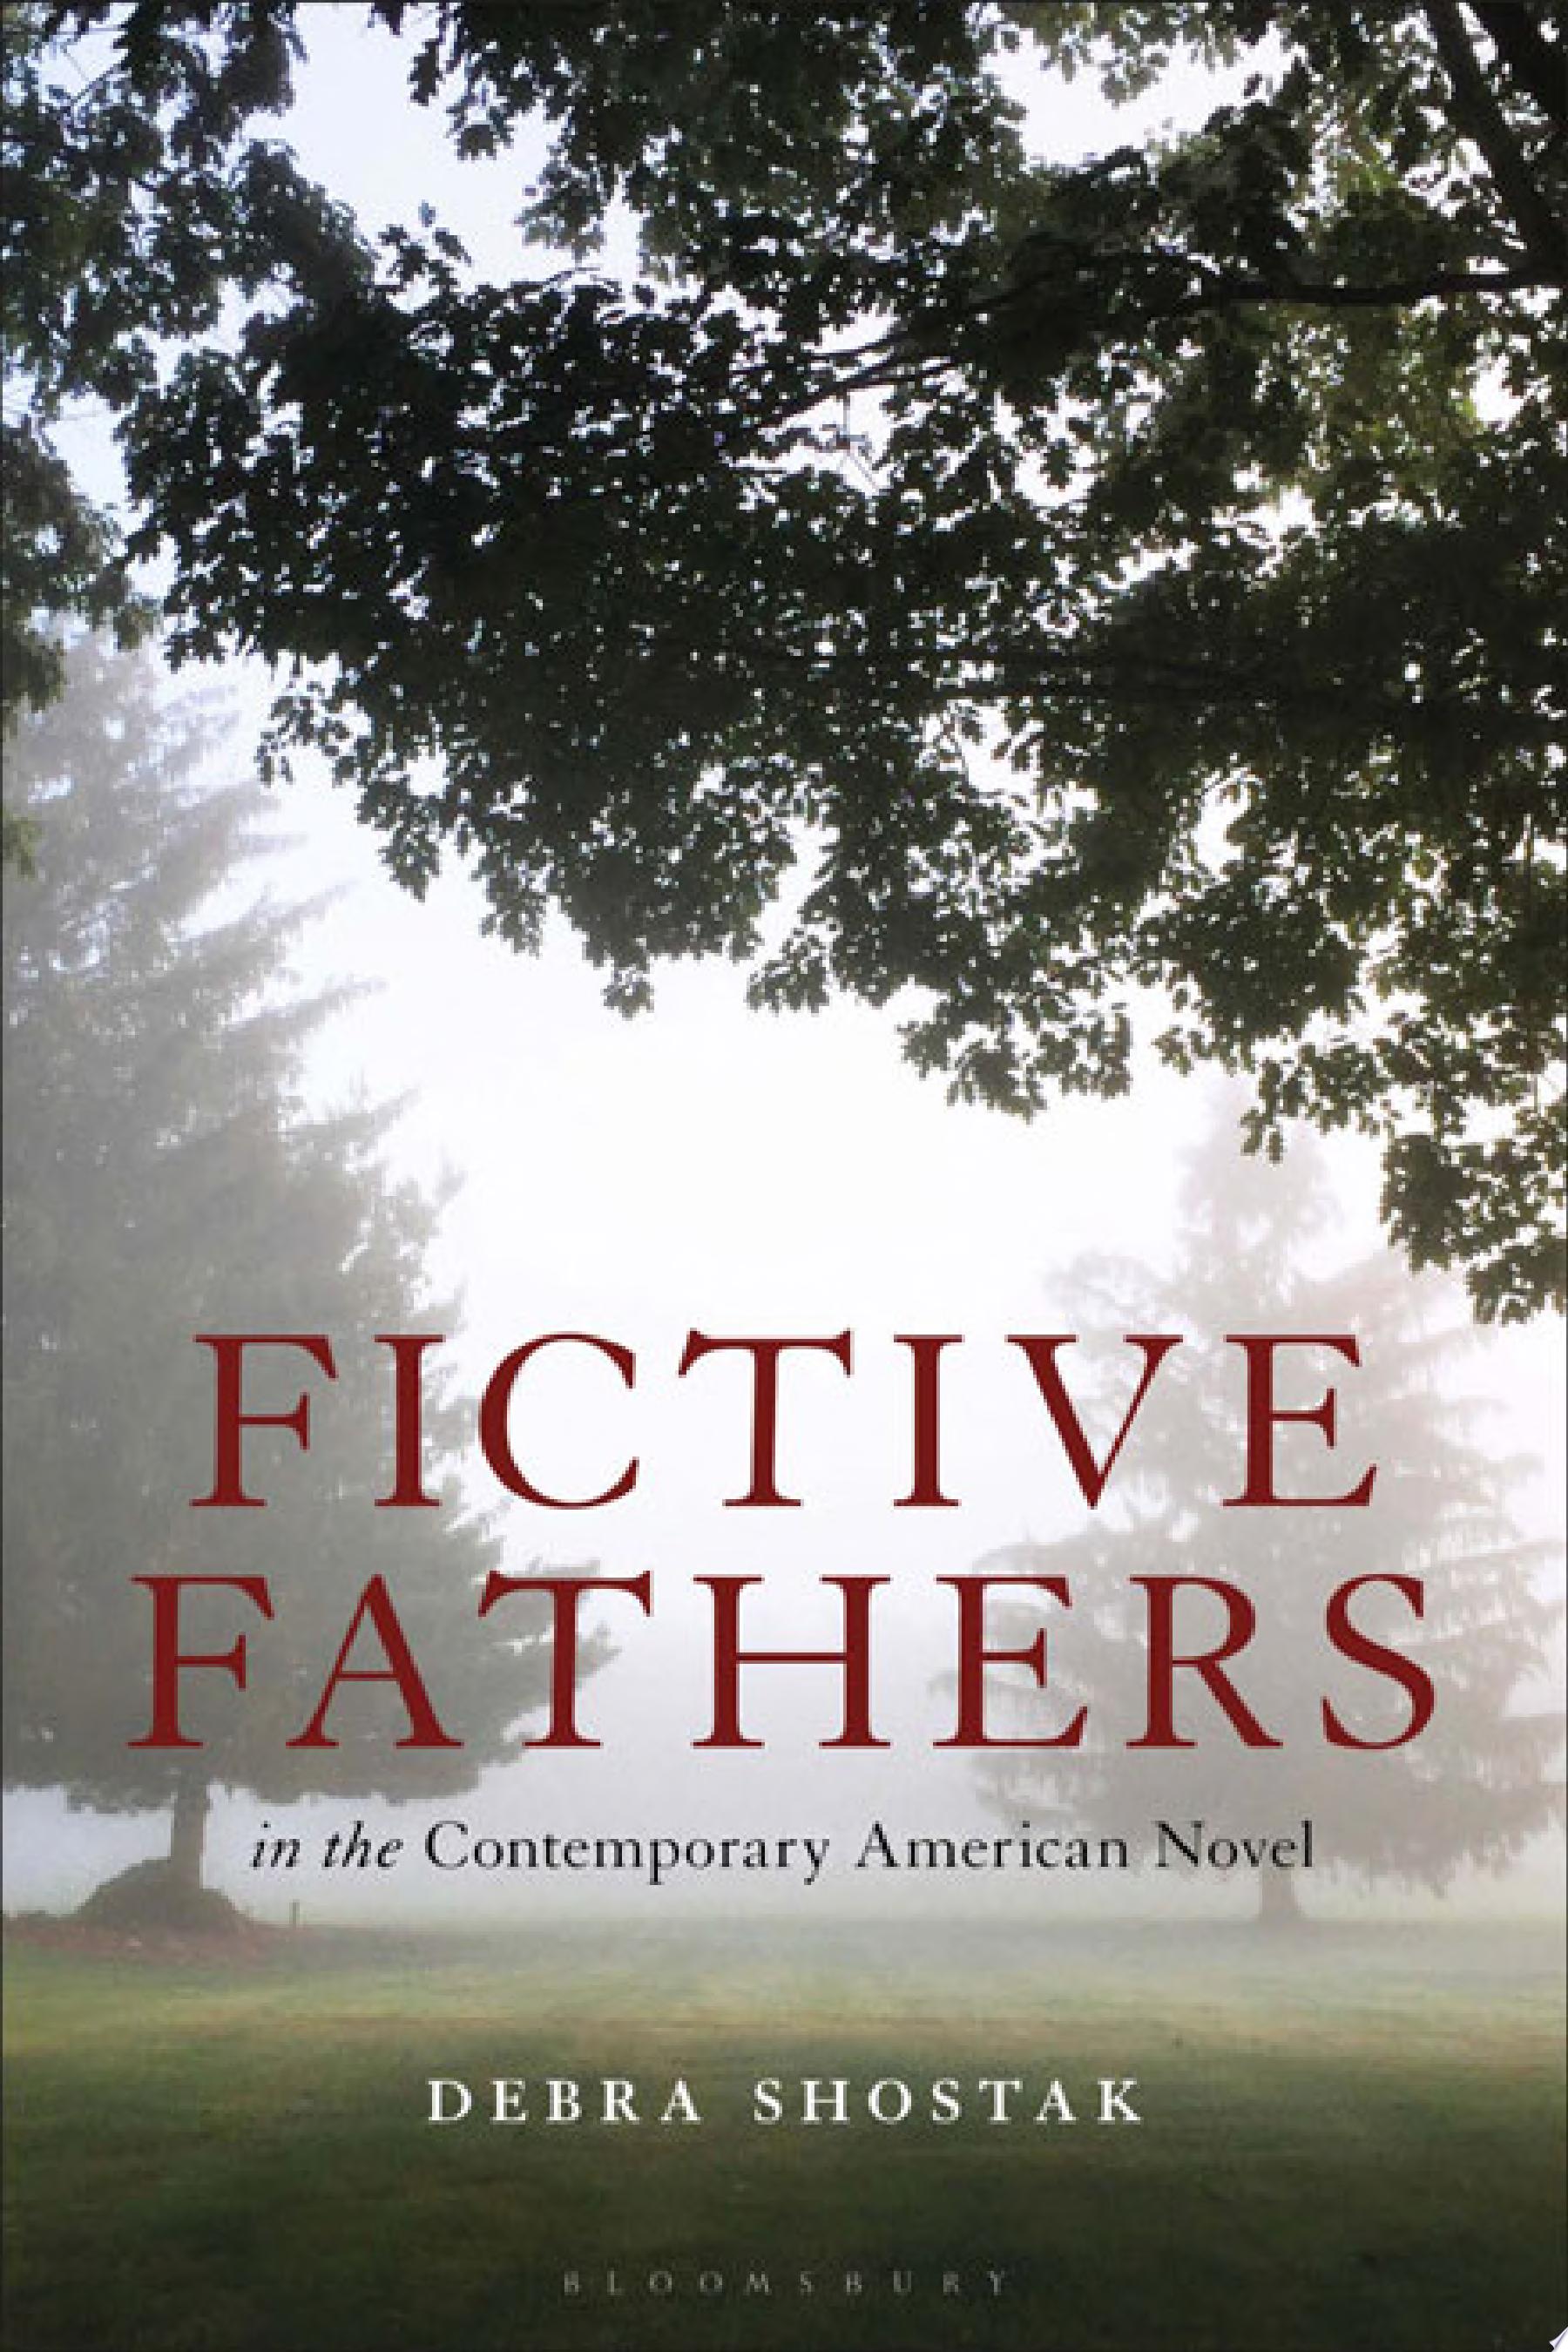 Image for "Fictive Fathers in the Contemporary American Novel"